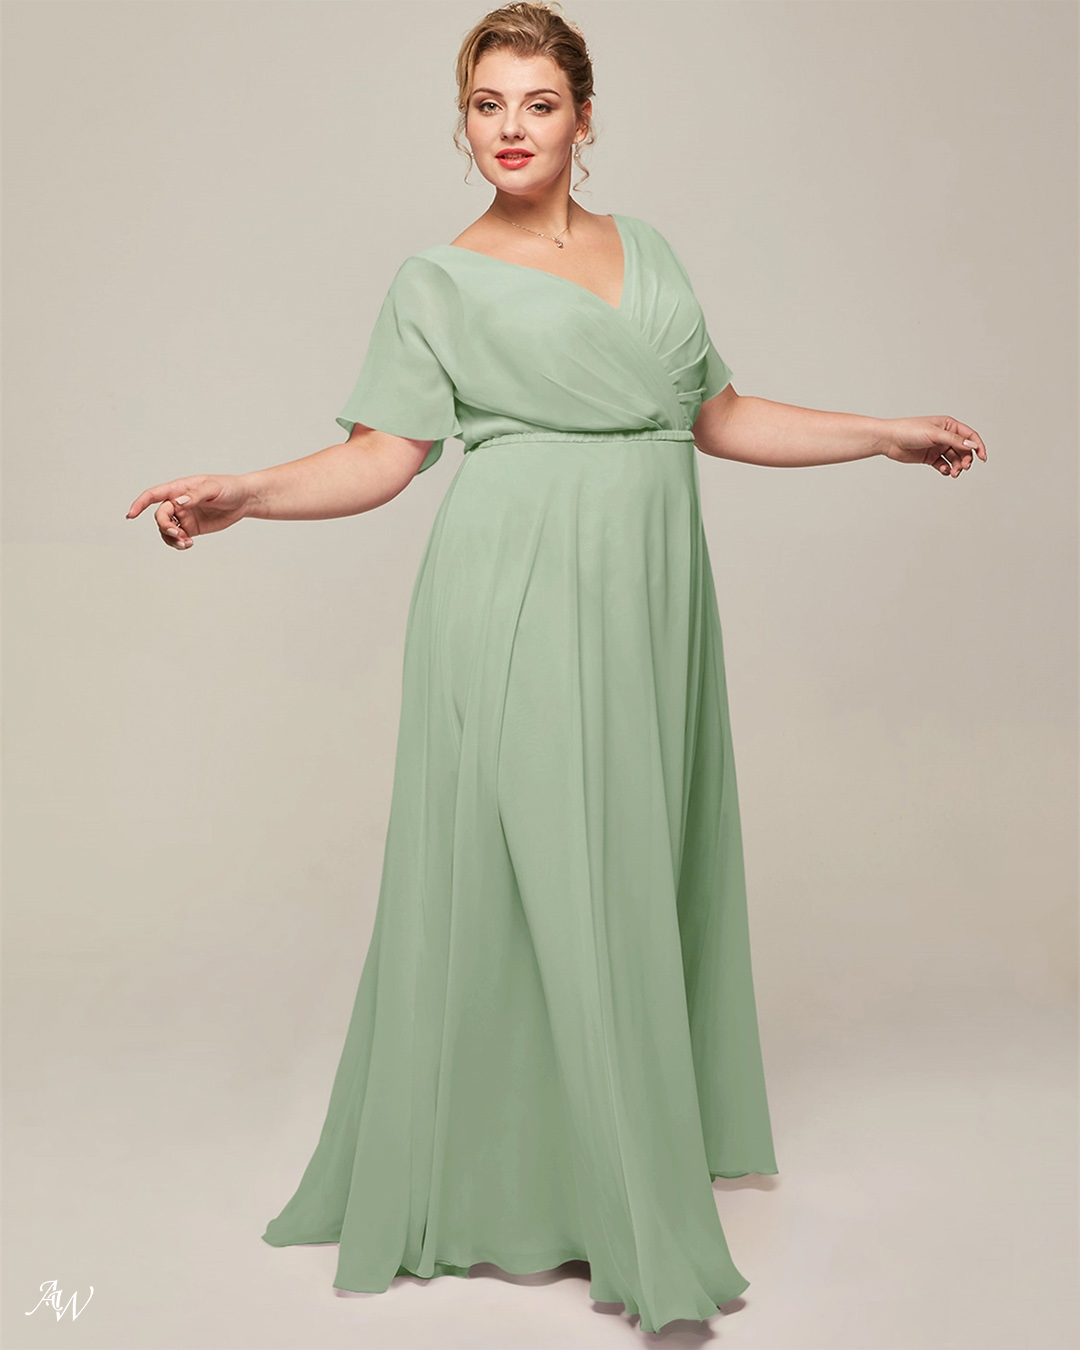 aw bridal dresses green simple long for plus size